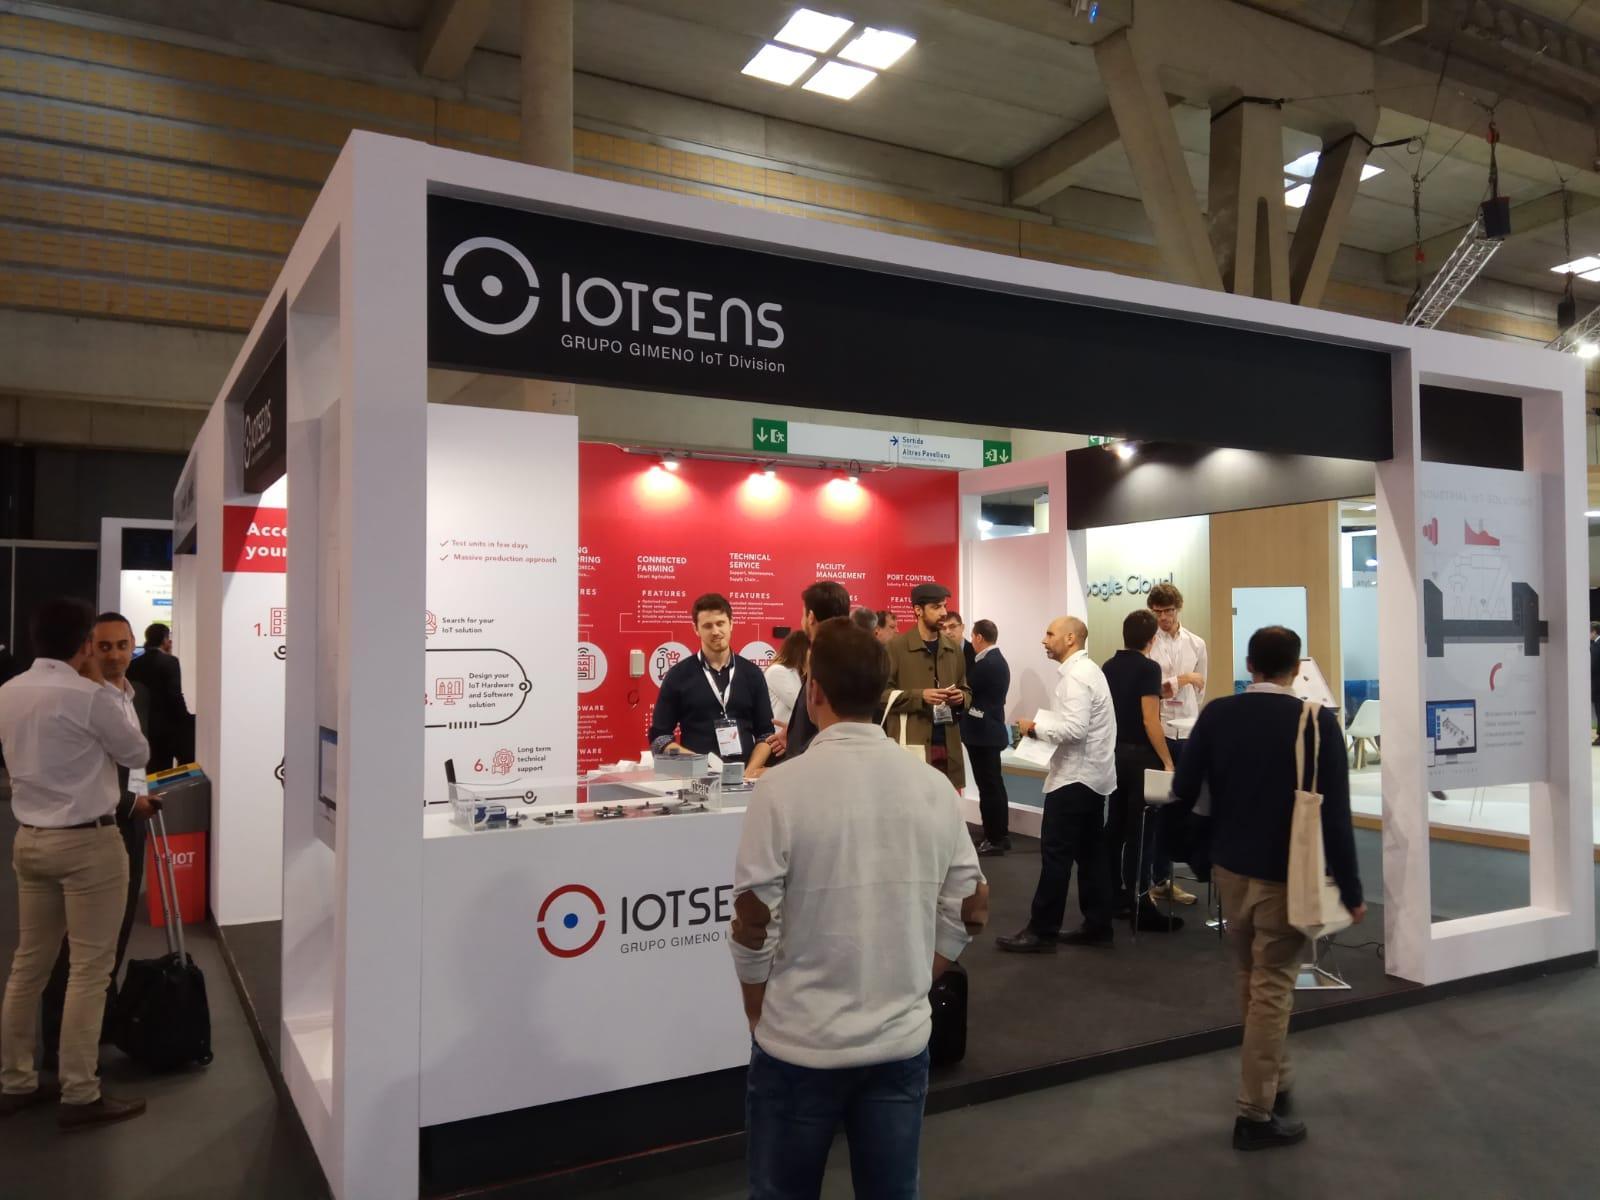 IoTsens attends the IoT Solutions World Congress 2018